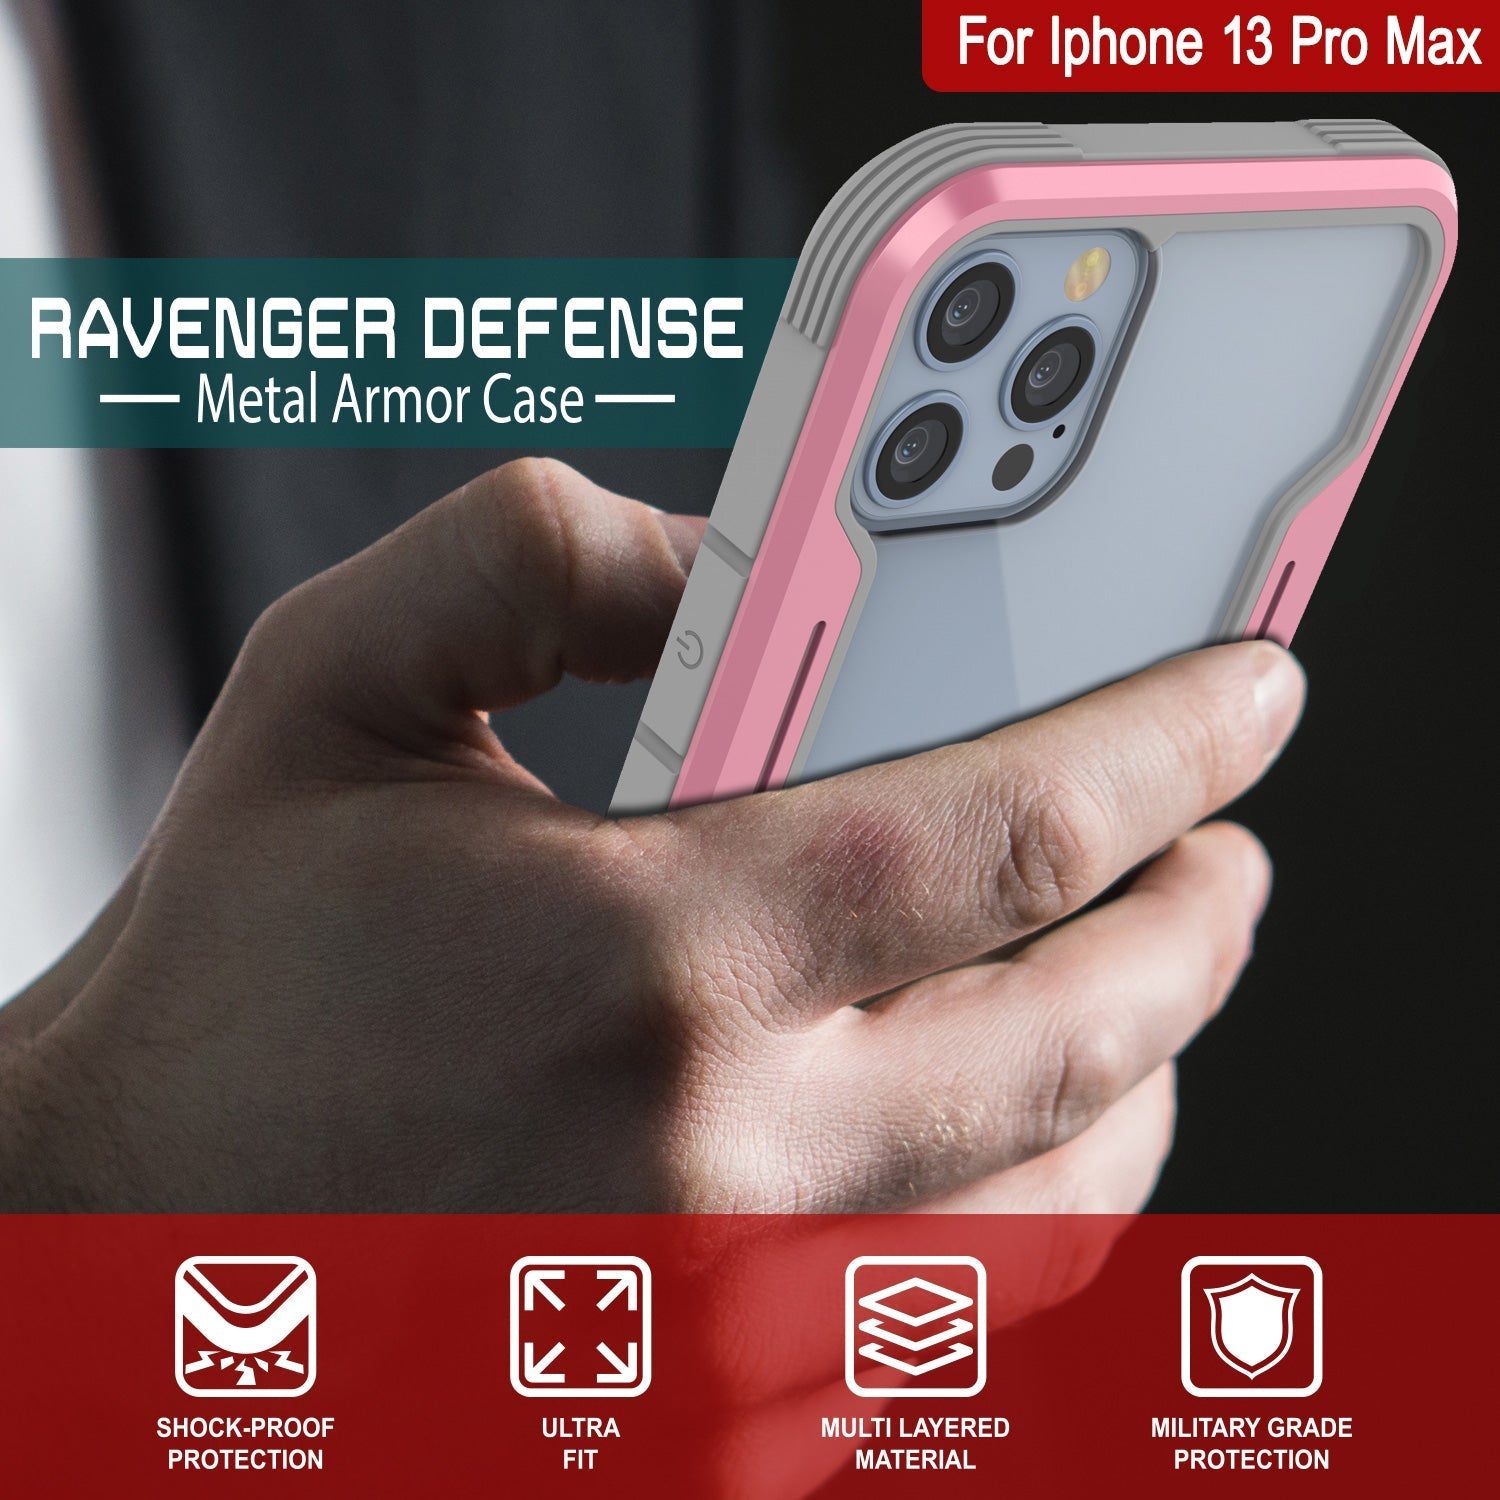 Punkcase iPhone 14 Pro Max Ravenger MAG Defense Case Protective Military Grade Multilayer Cover [Rose-Gold]